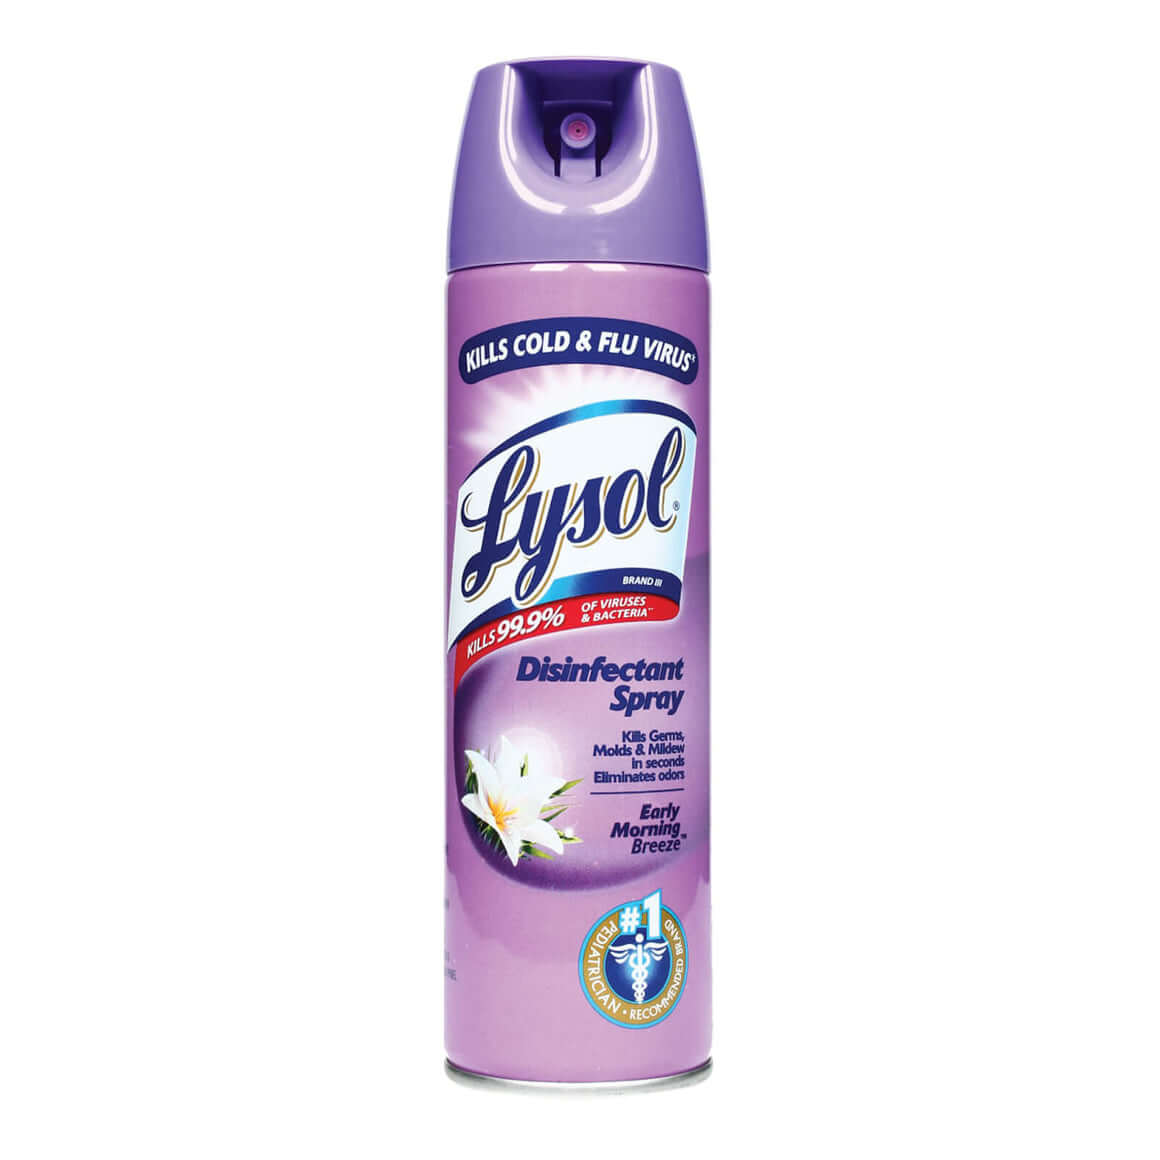 Lysol Early Morning Breeze 340 g Reckitt Benckiser Healthcare (Phils.) Inc. online in Philippines